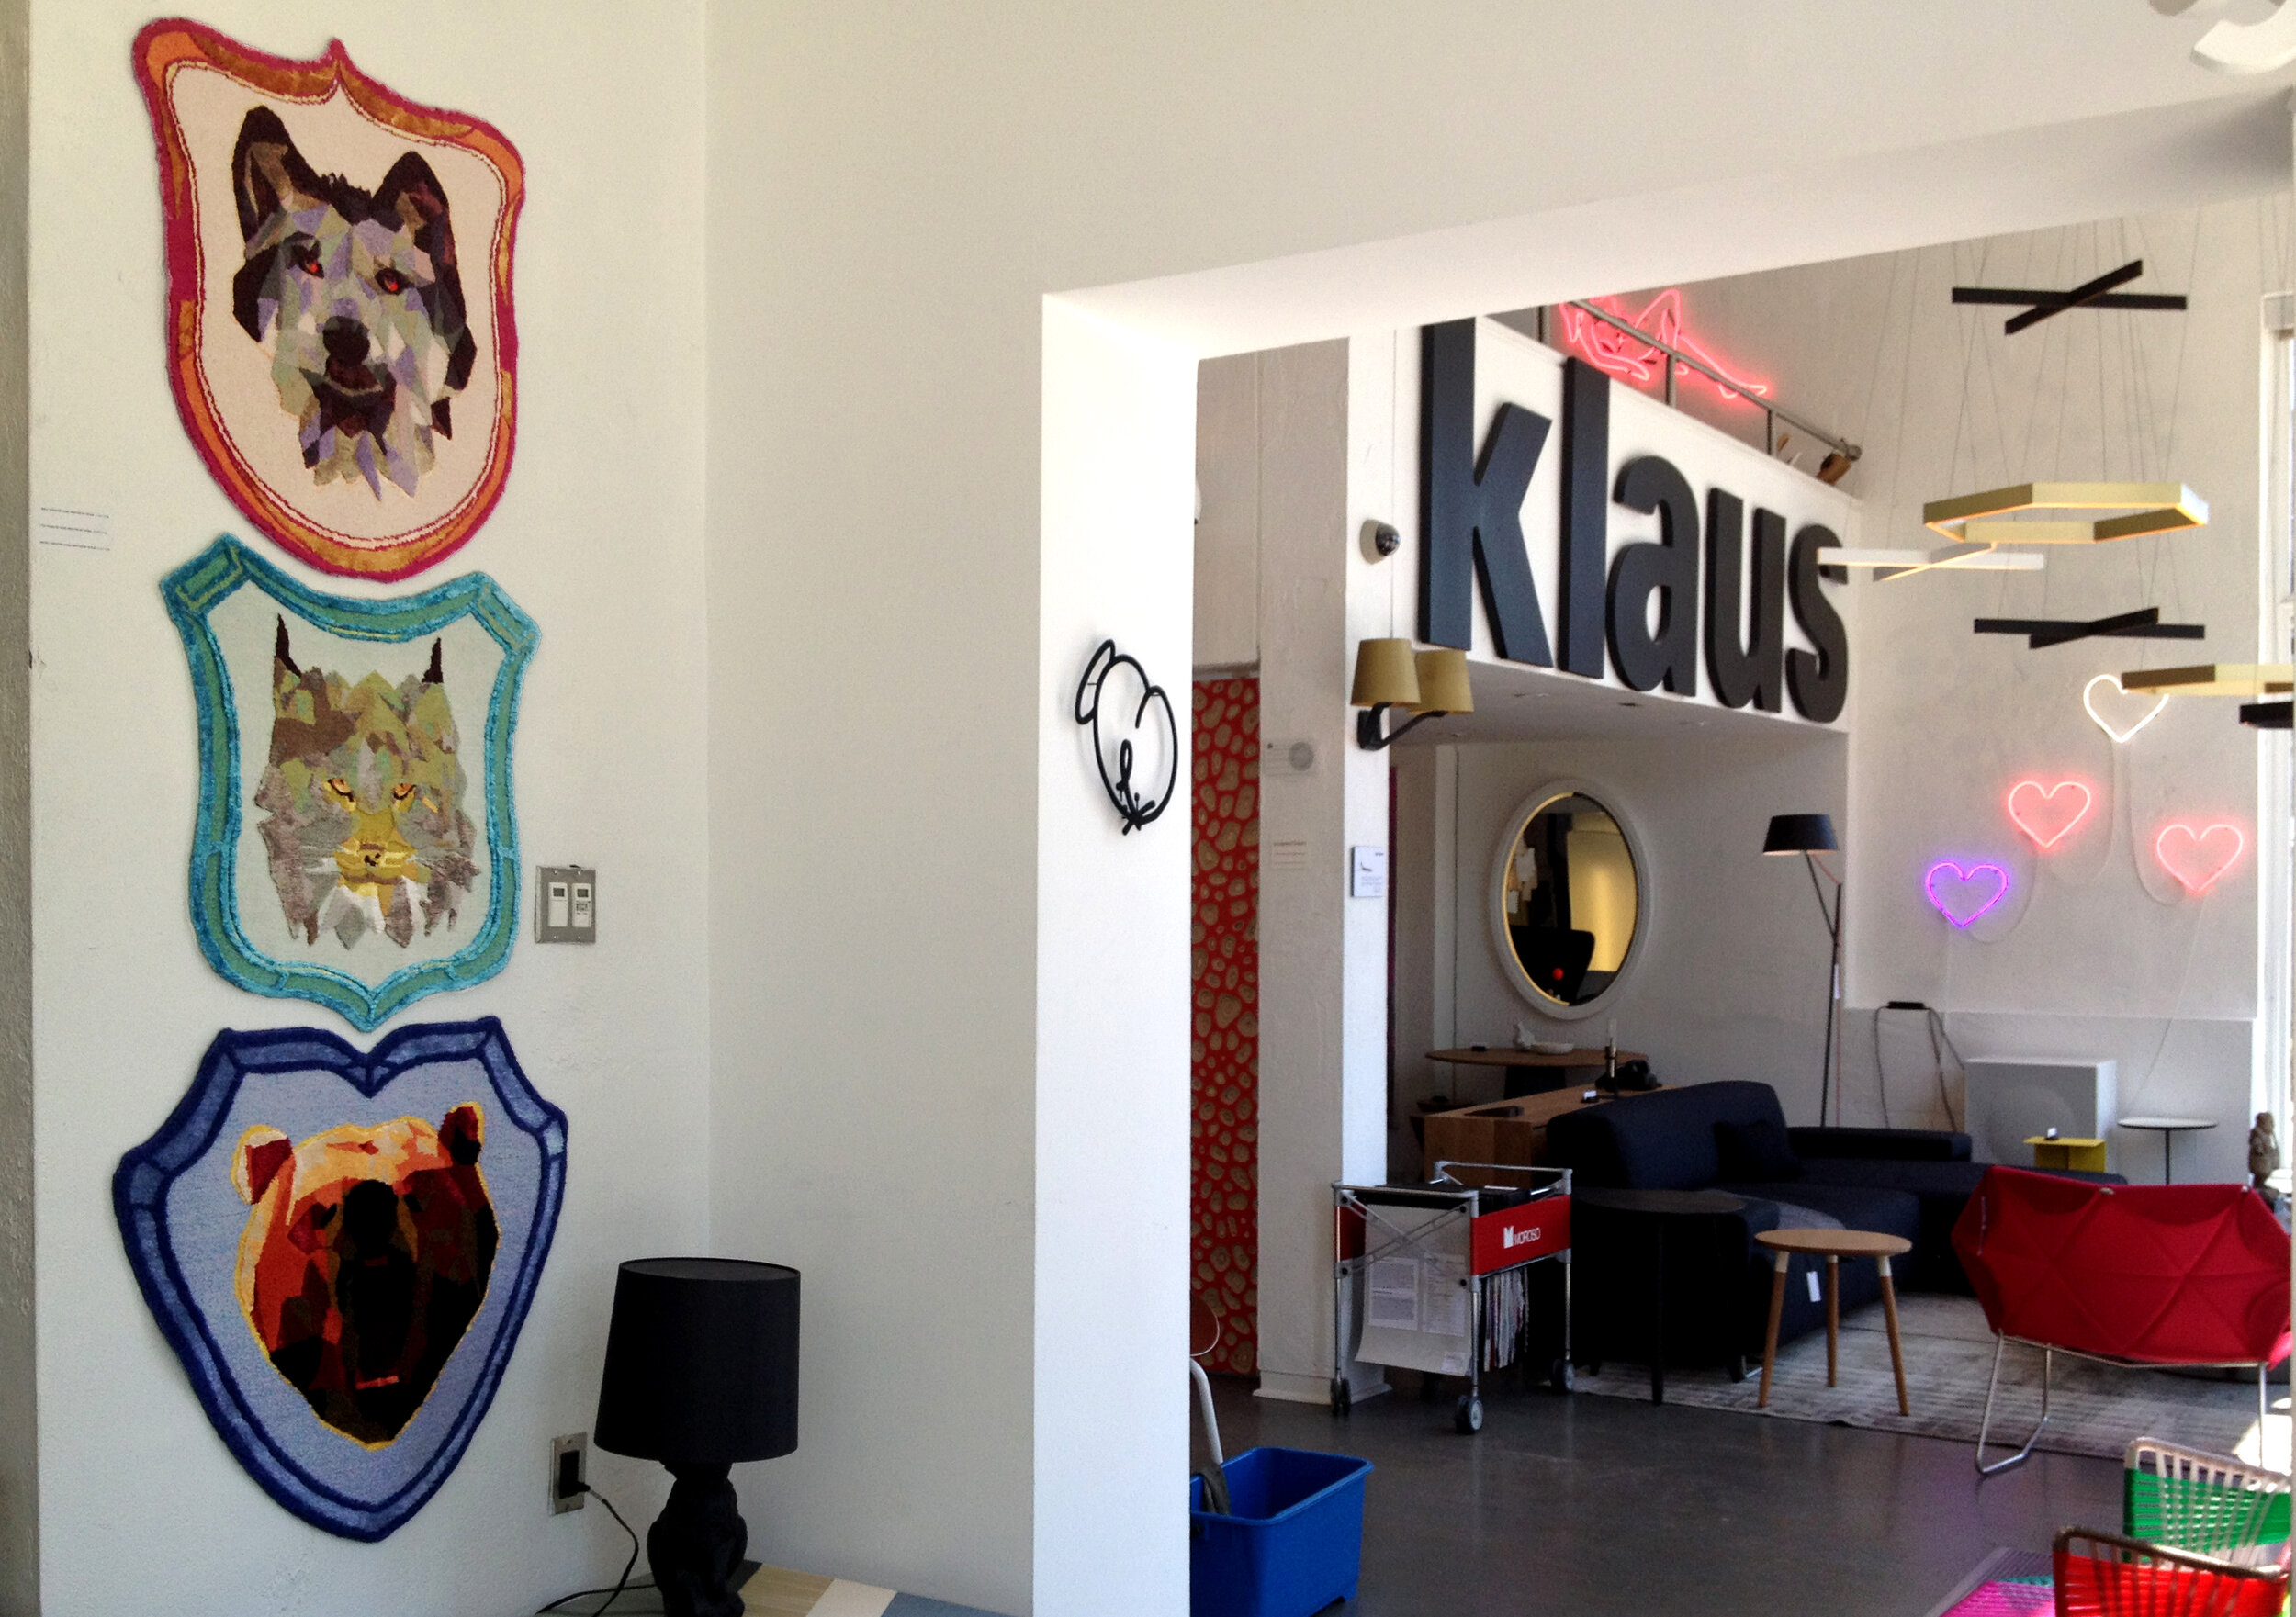   Animal Crests  featured in the KLAUS showroom. 